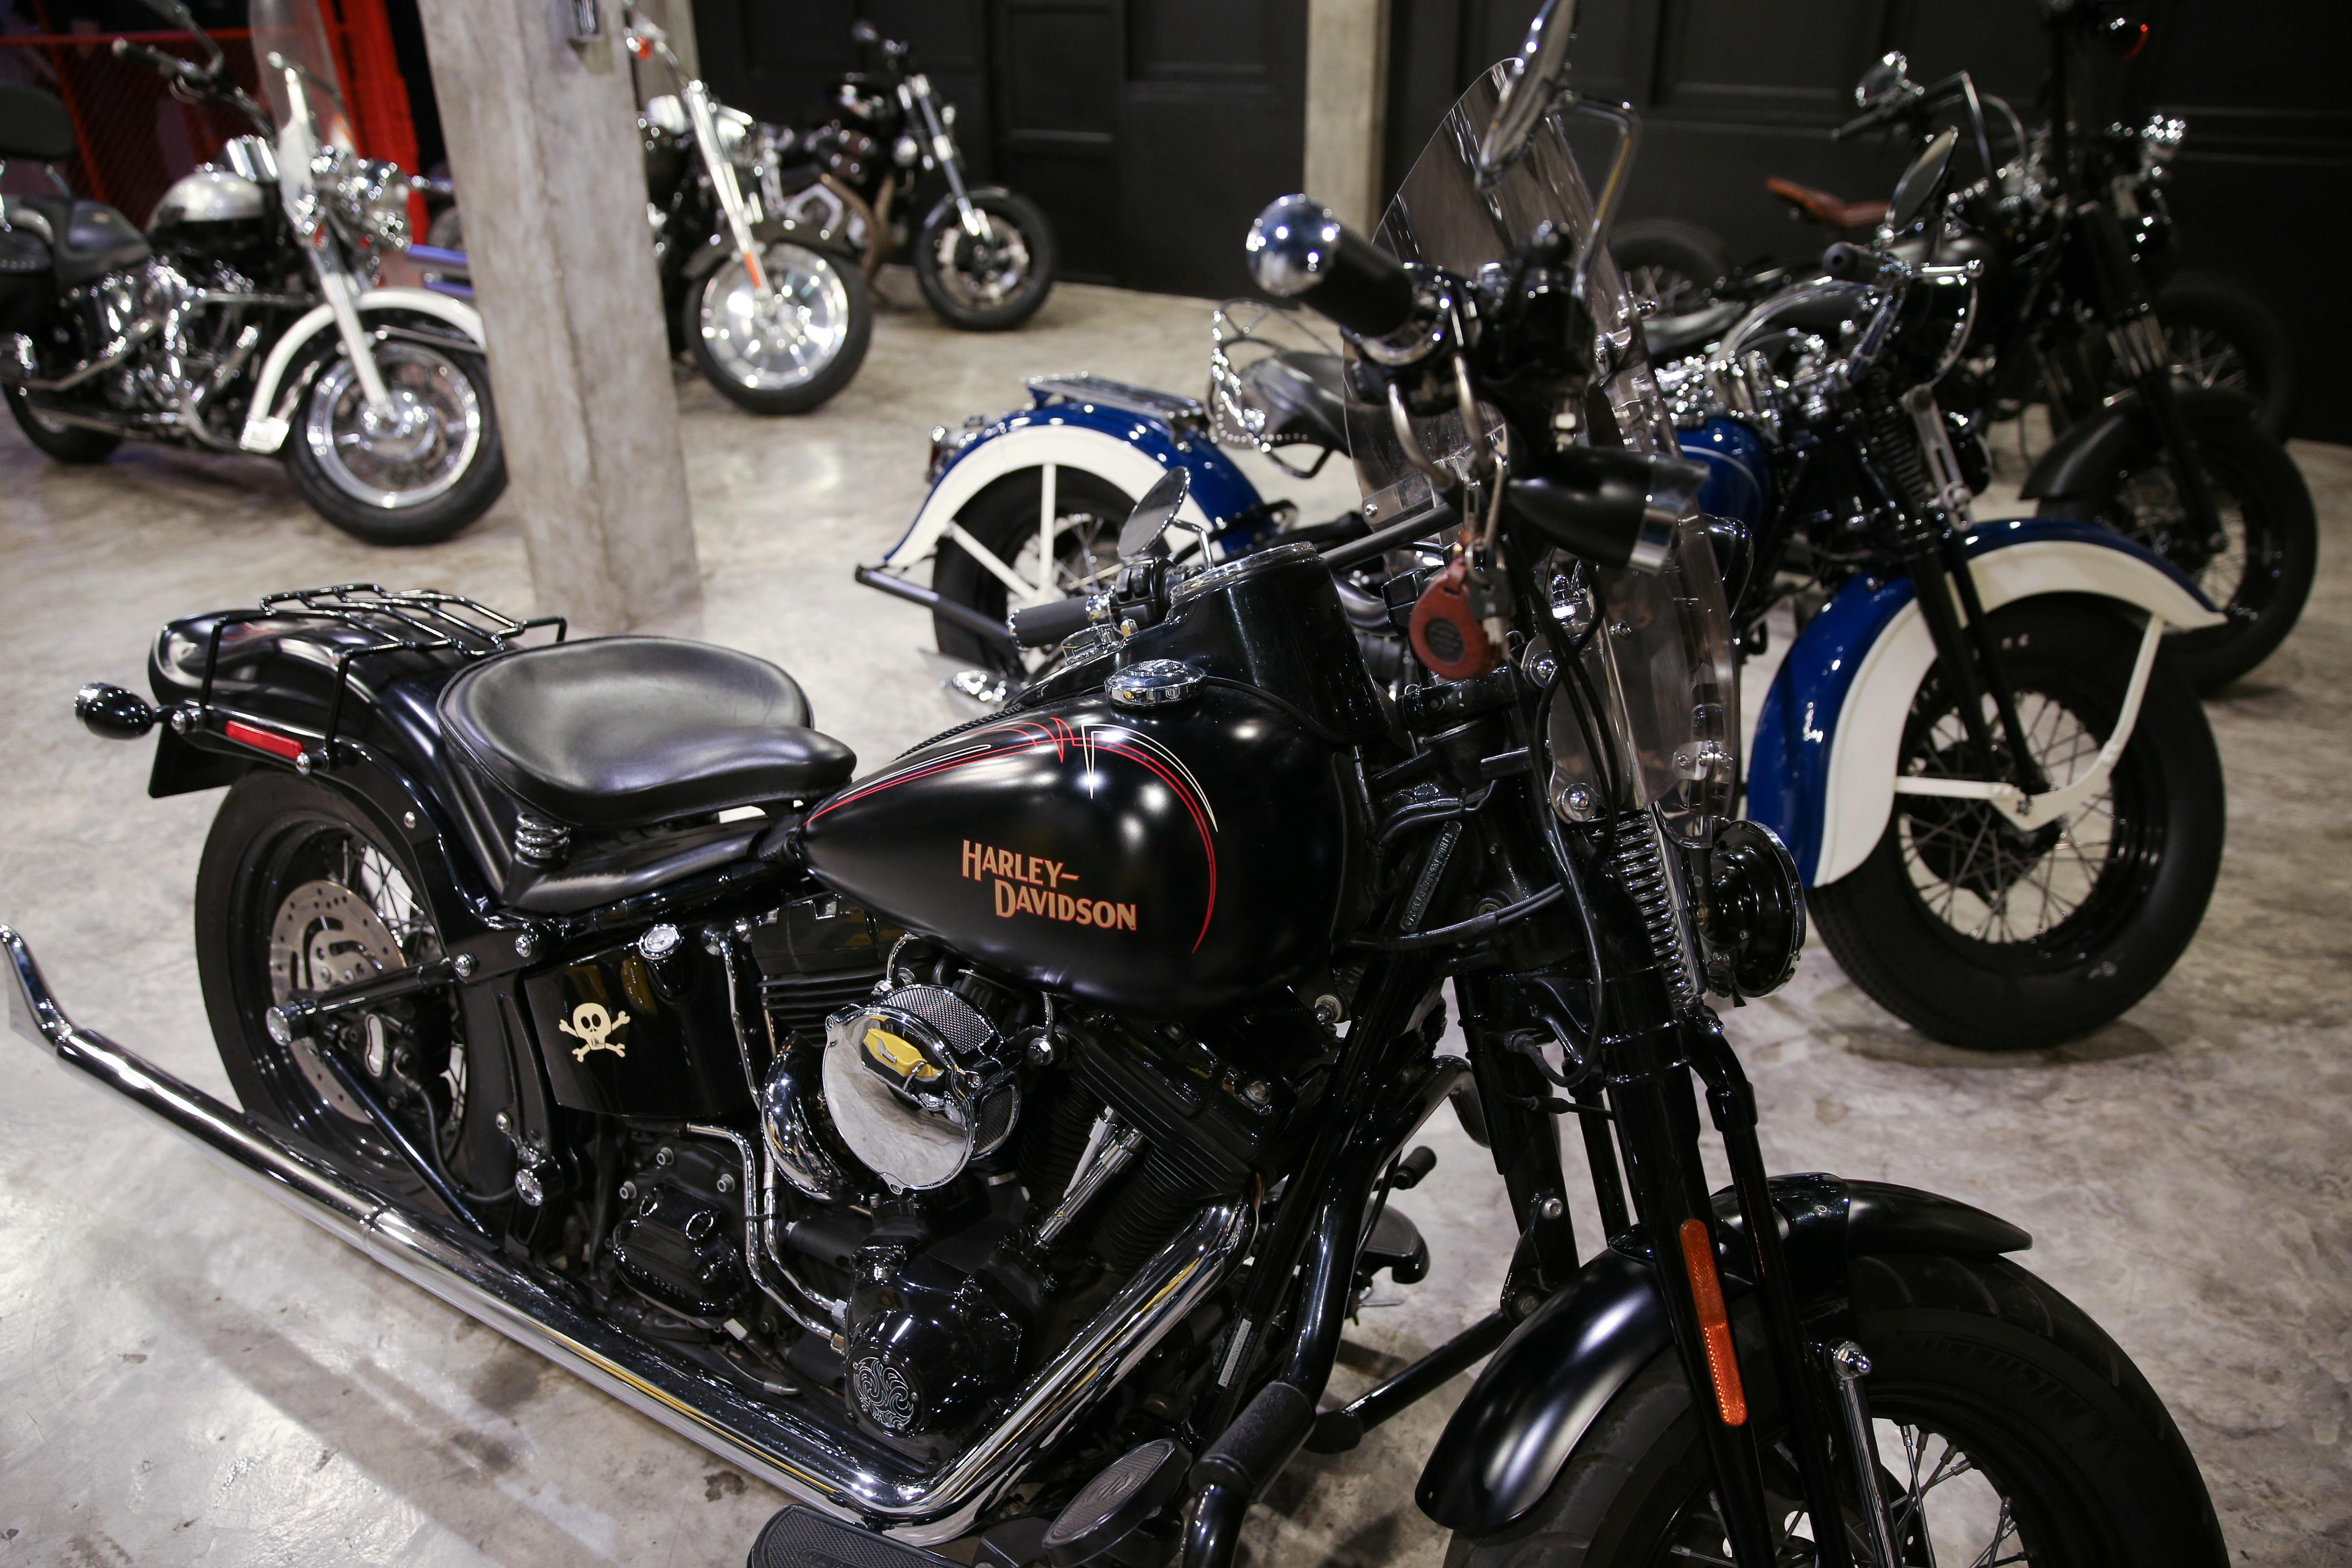 Harley Davidson Reaches Deal To Make Smaller Bikes In China